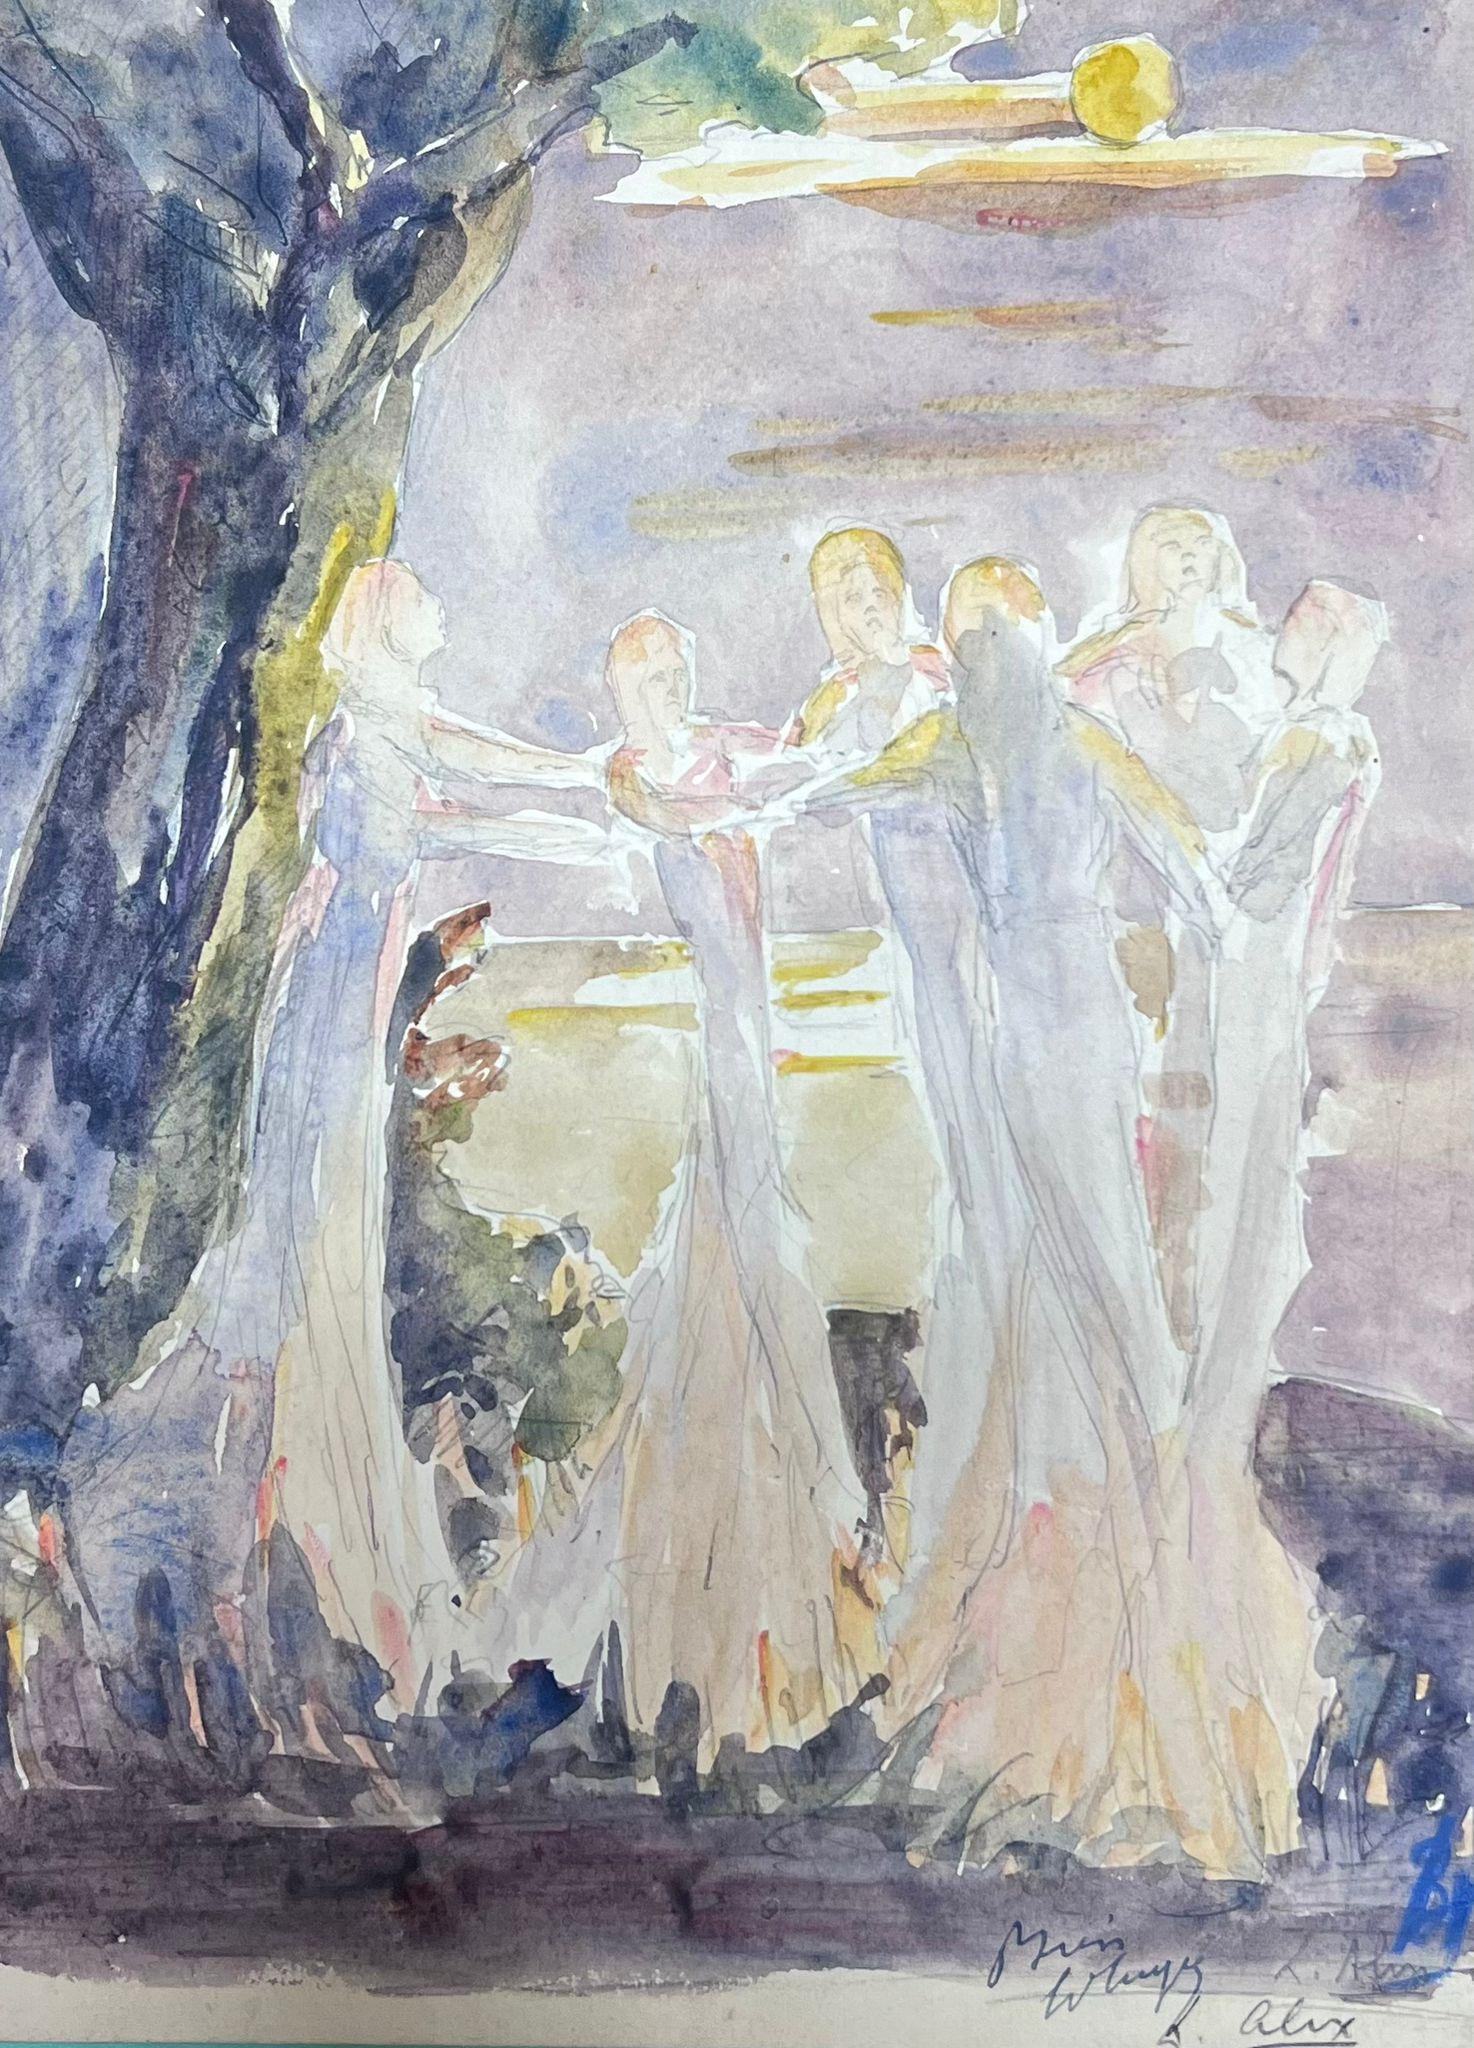 Louise Alix Figurative Painting - Figures In White Dancing In The Summer's Light Forest 1930's French Landscape